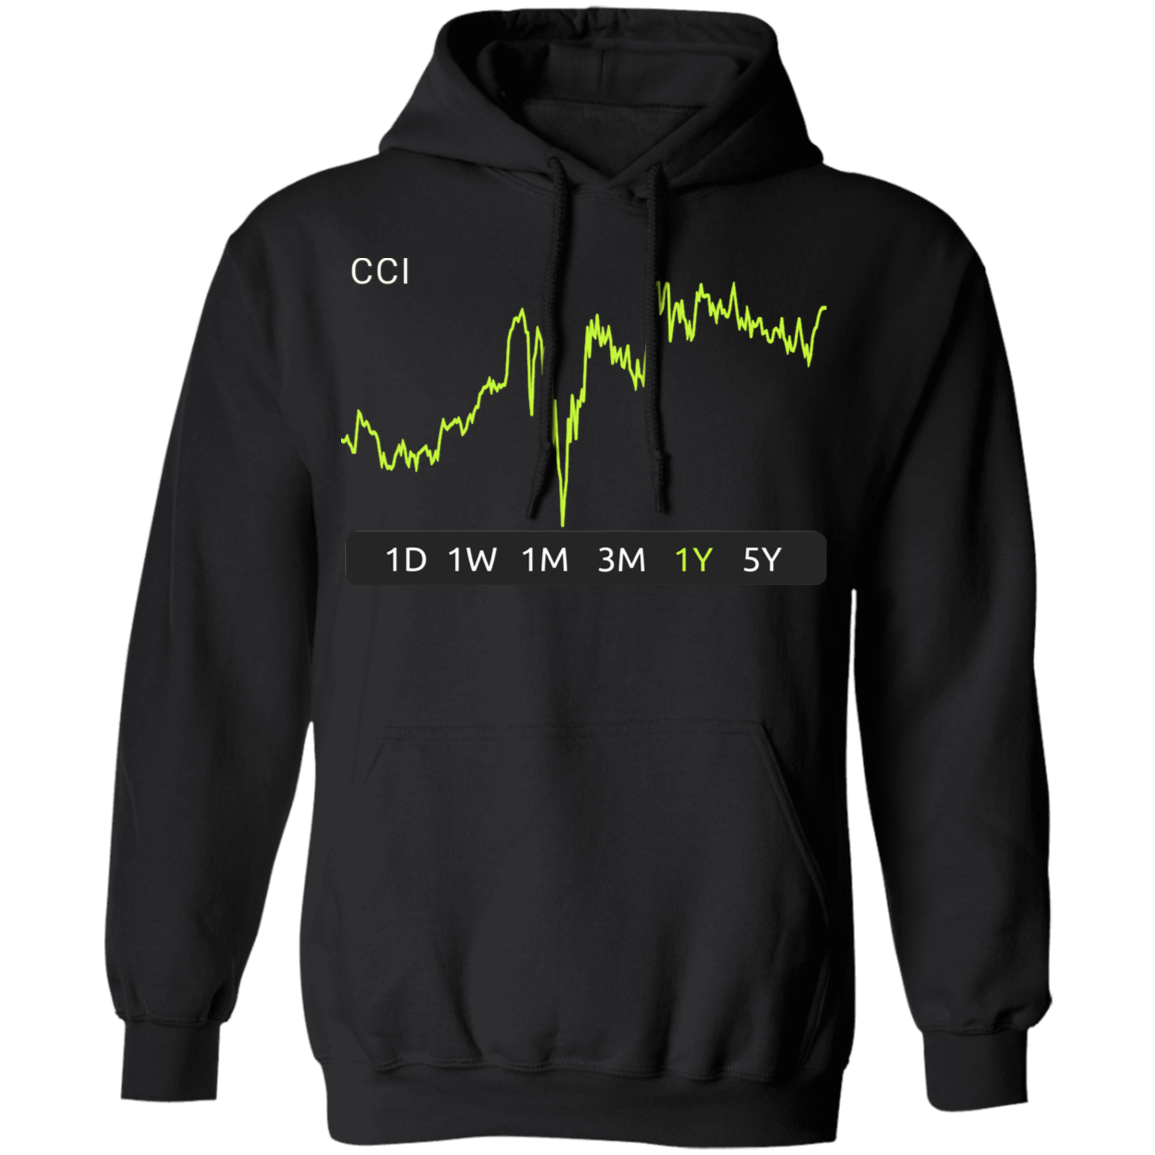 CCI Stock 1y Pullover Hoodie